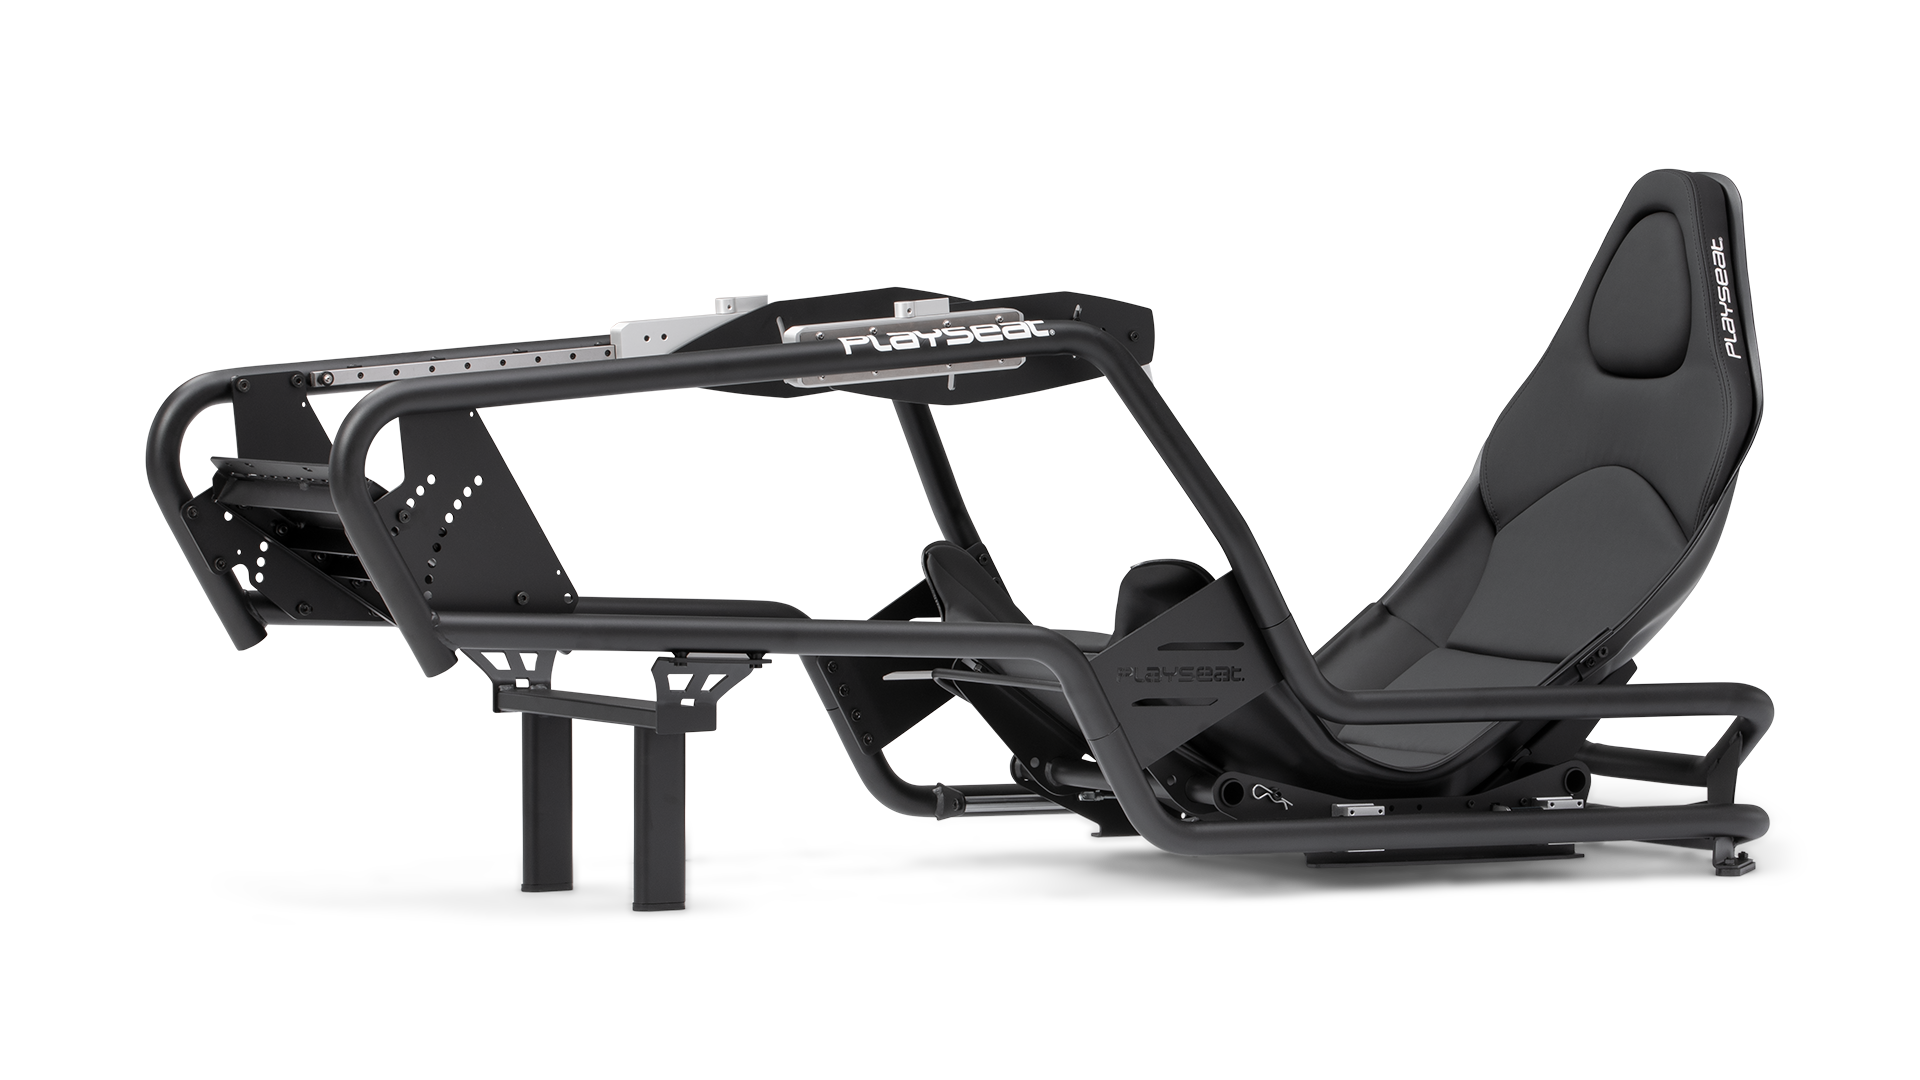 Sebastian Vettel's New Home Racing Sim Rig Is Made From An Actual F1 Car